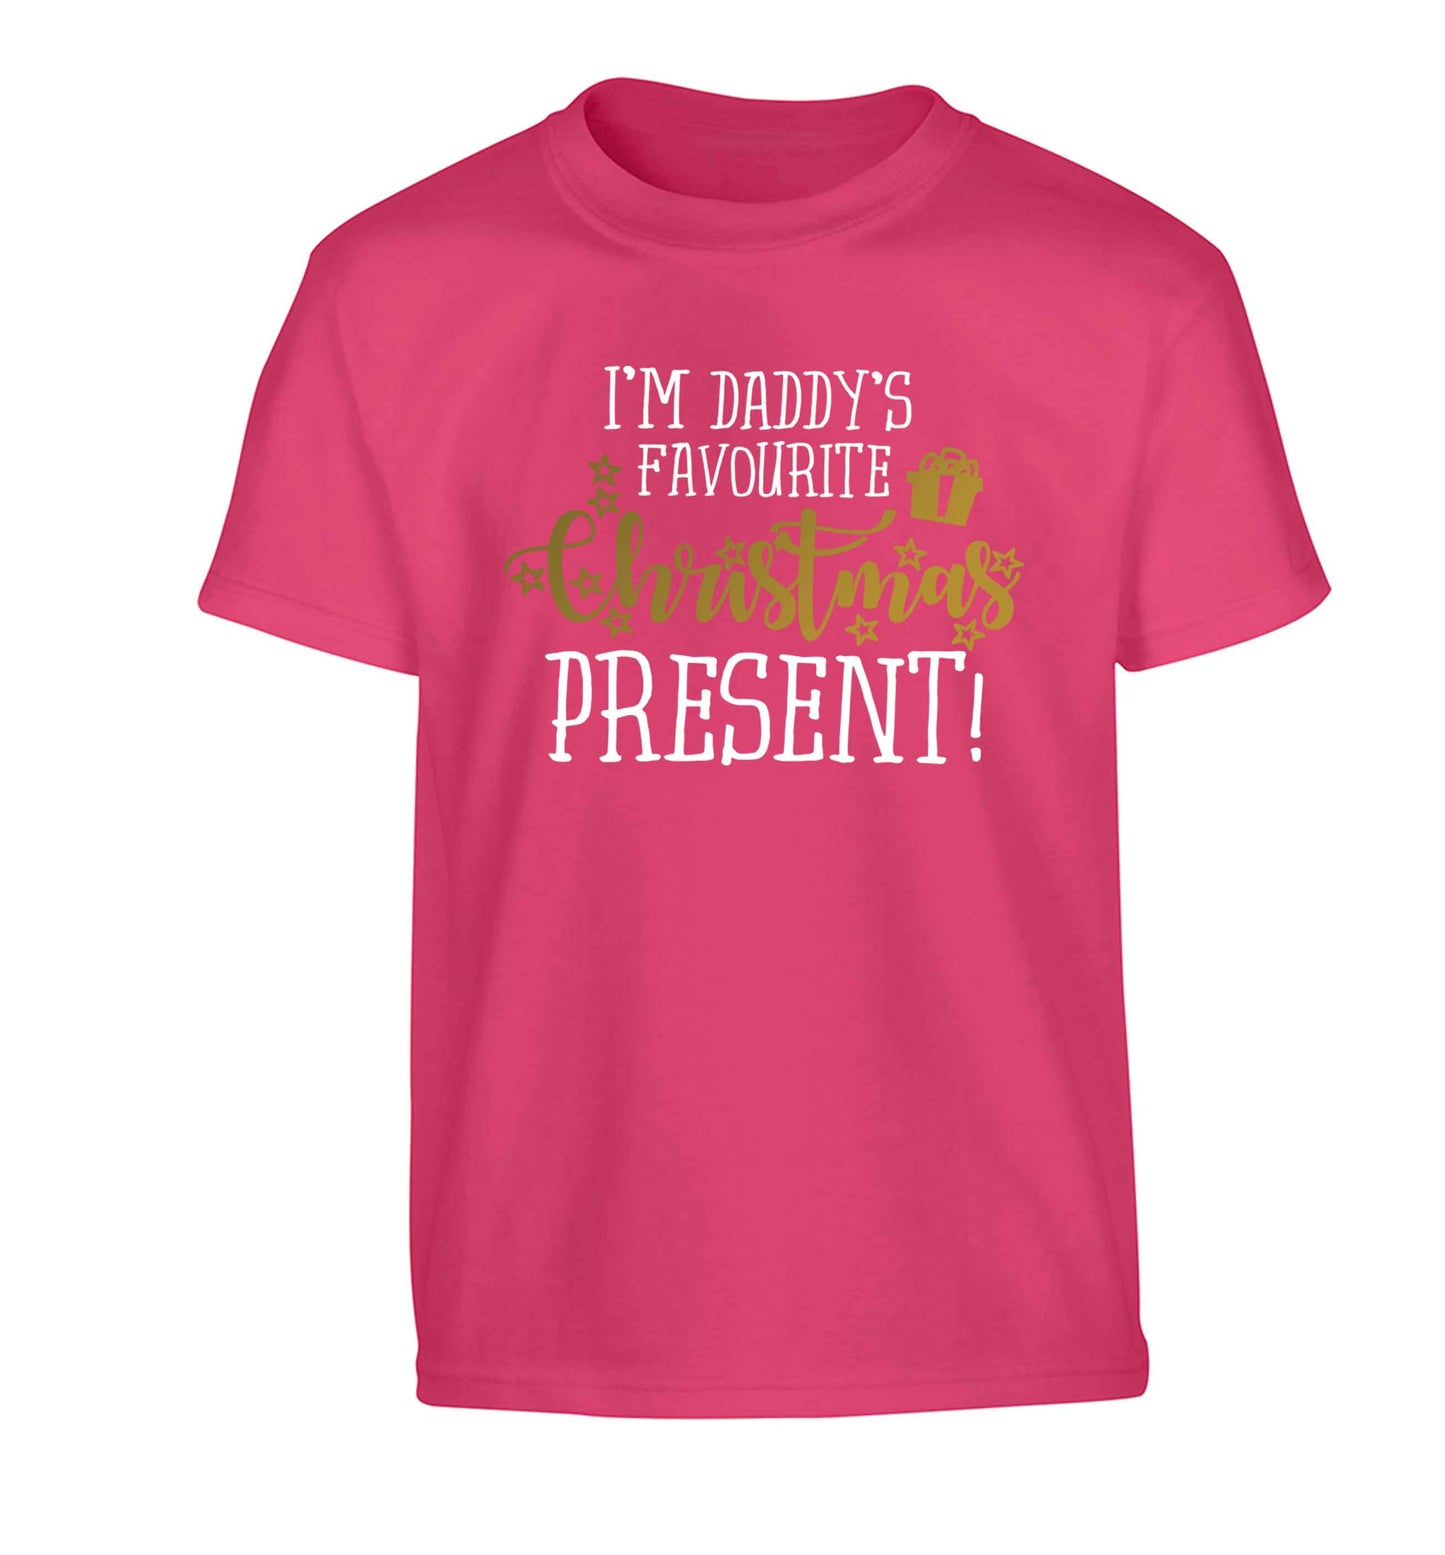 Daddy's favourite Christmas present Children's pink Tshirt 12-13 Years